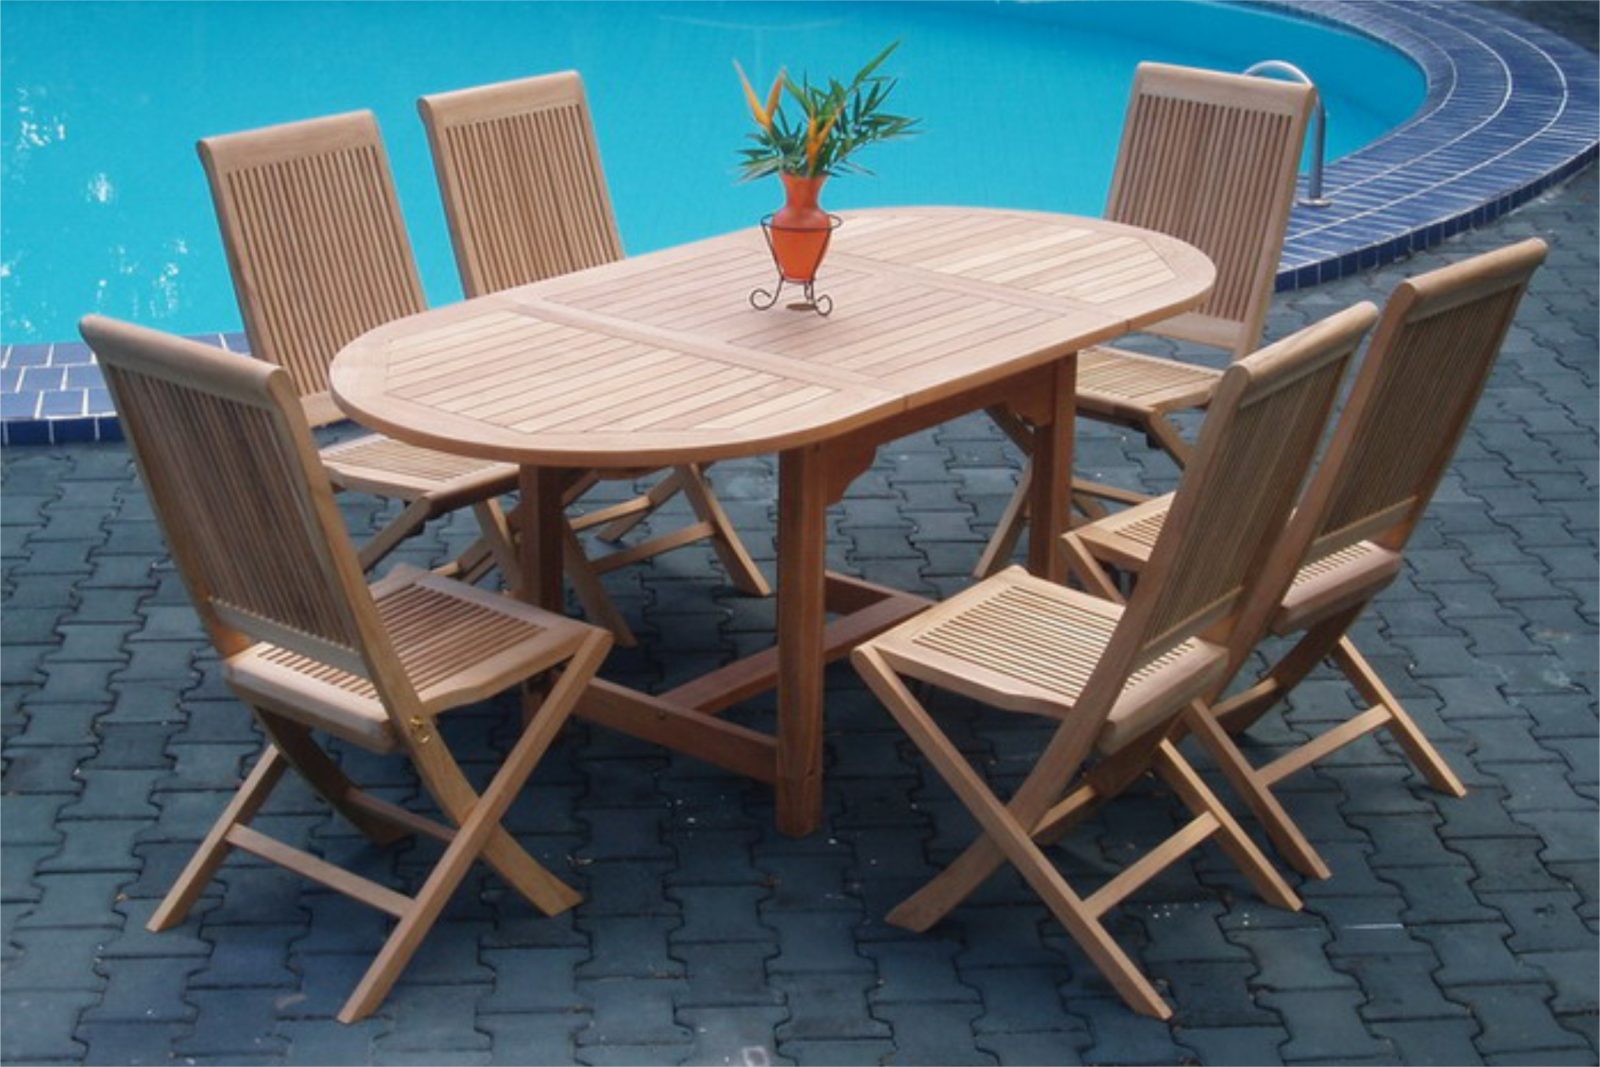 Why Teak? Top 5 Reasons To Choose Teak Furniture For Your Home